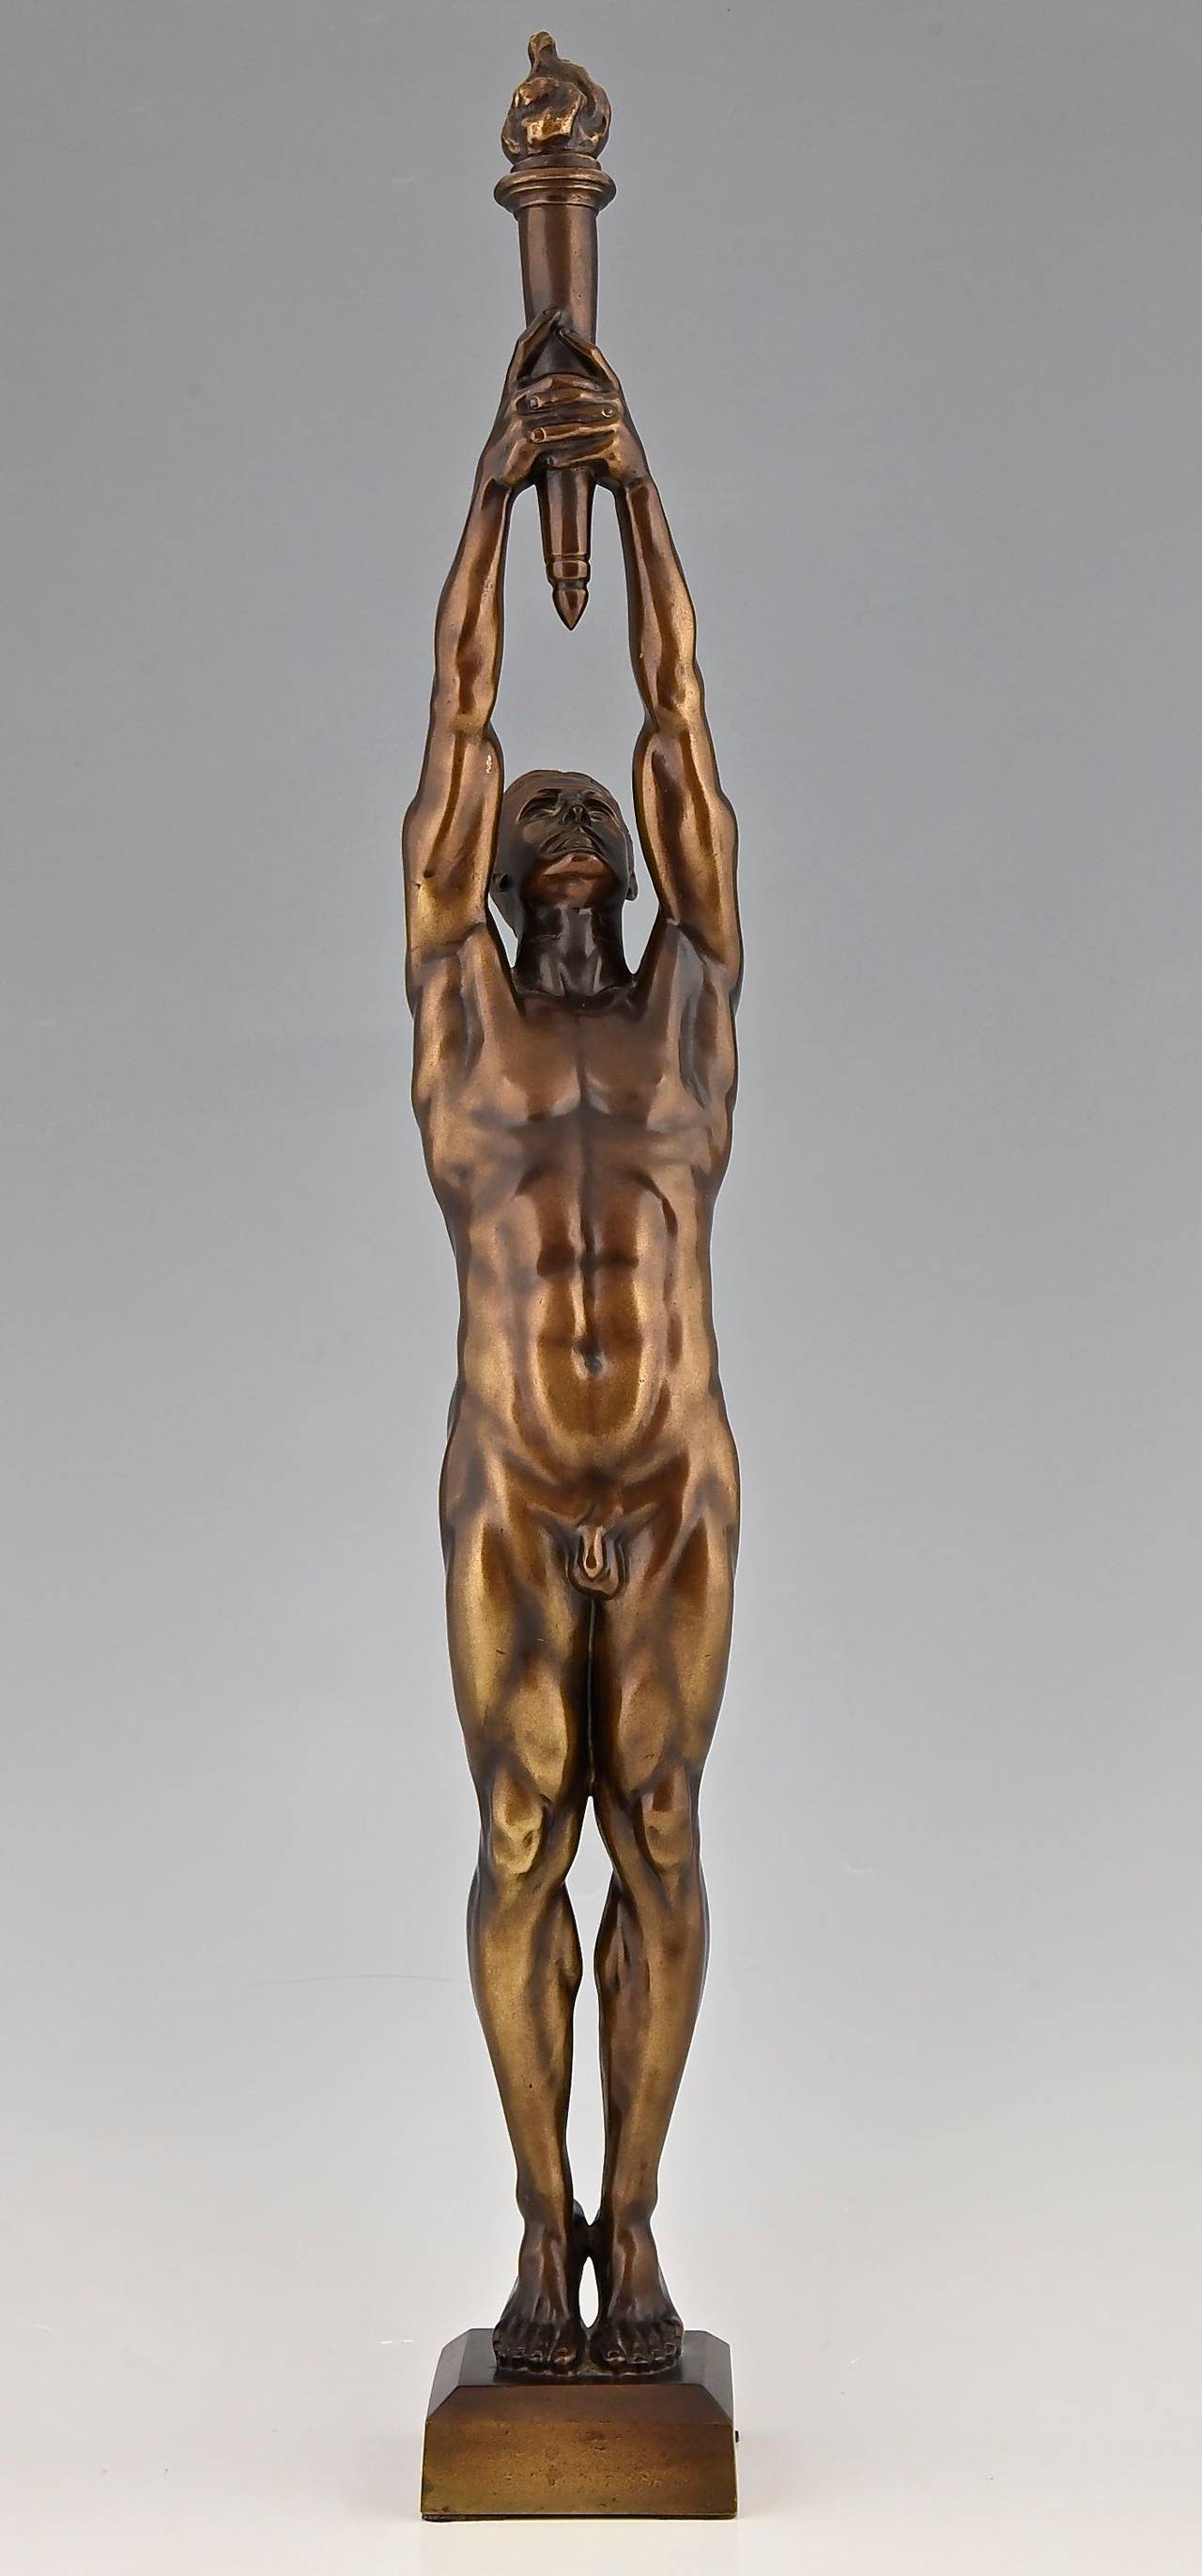 Art Deco Bronze Sculpture of a Male Nude with Torch by A. Puttemans, Belgium, 1912